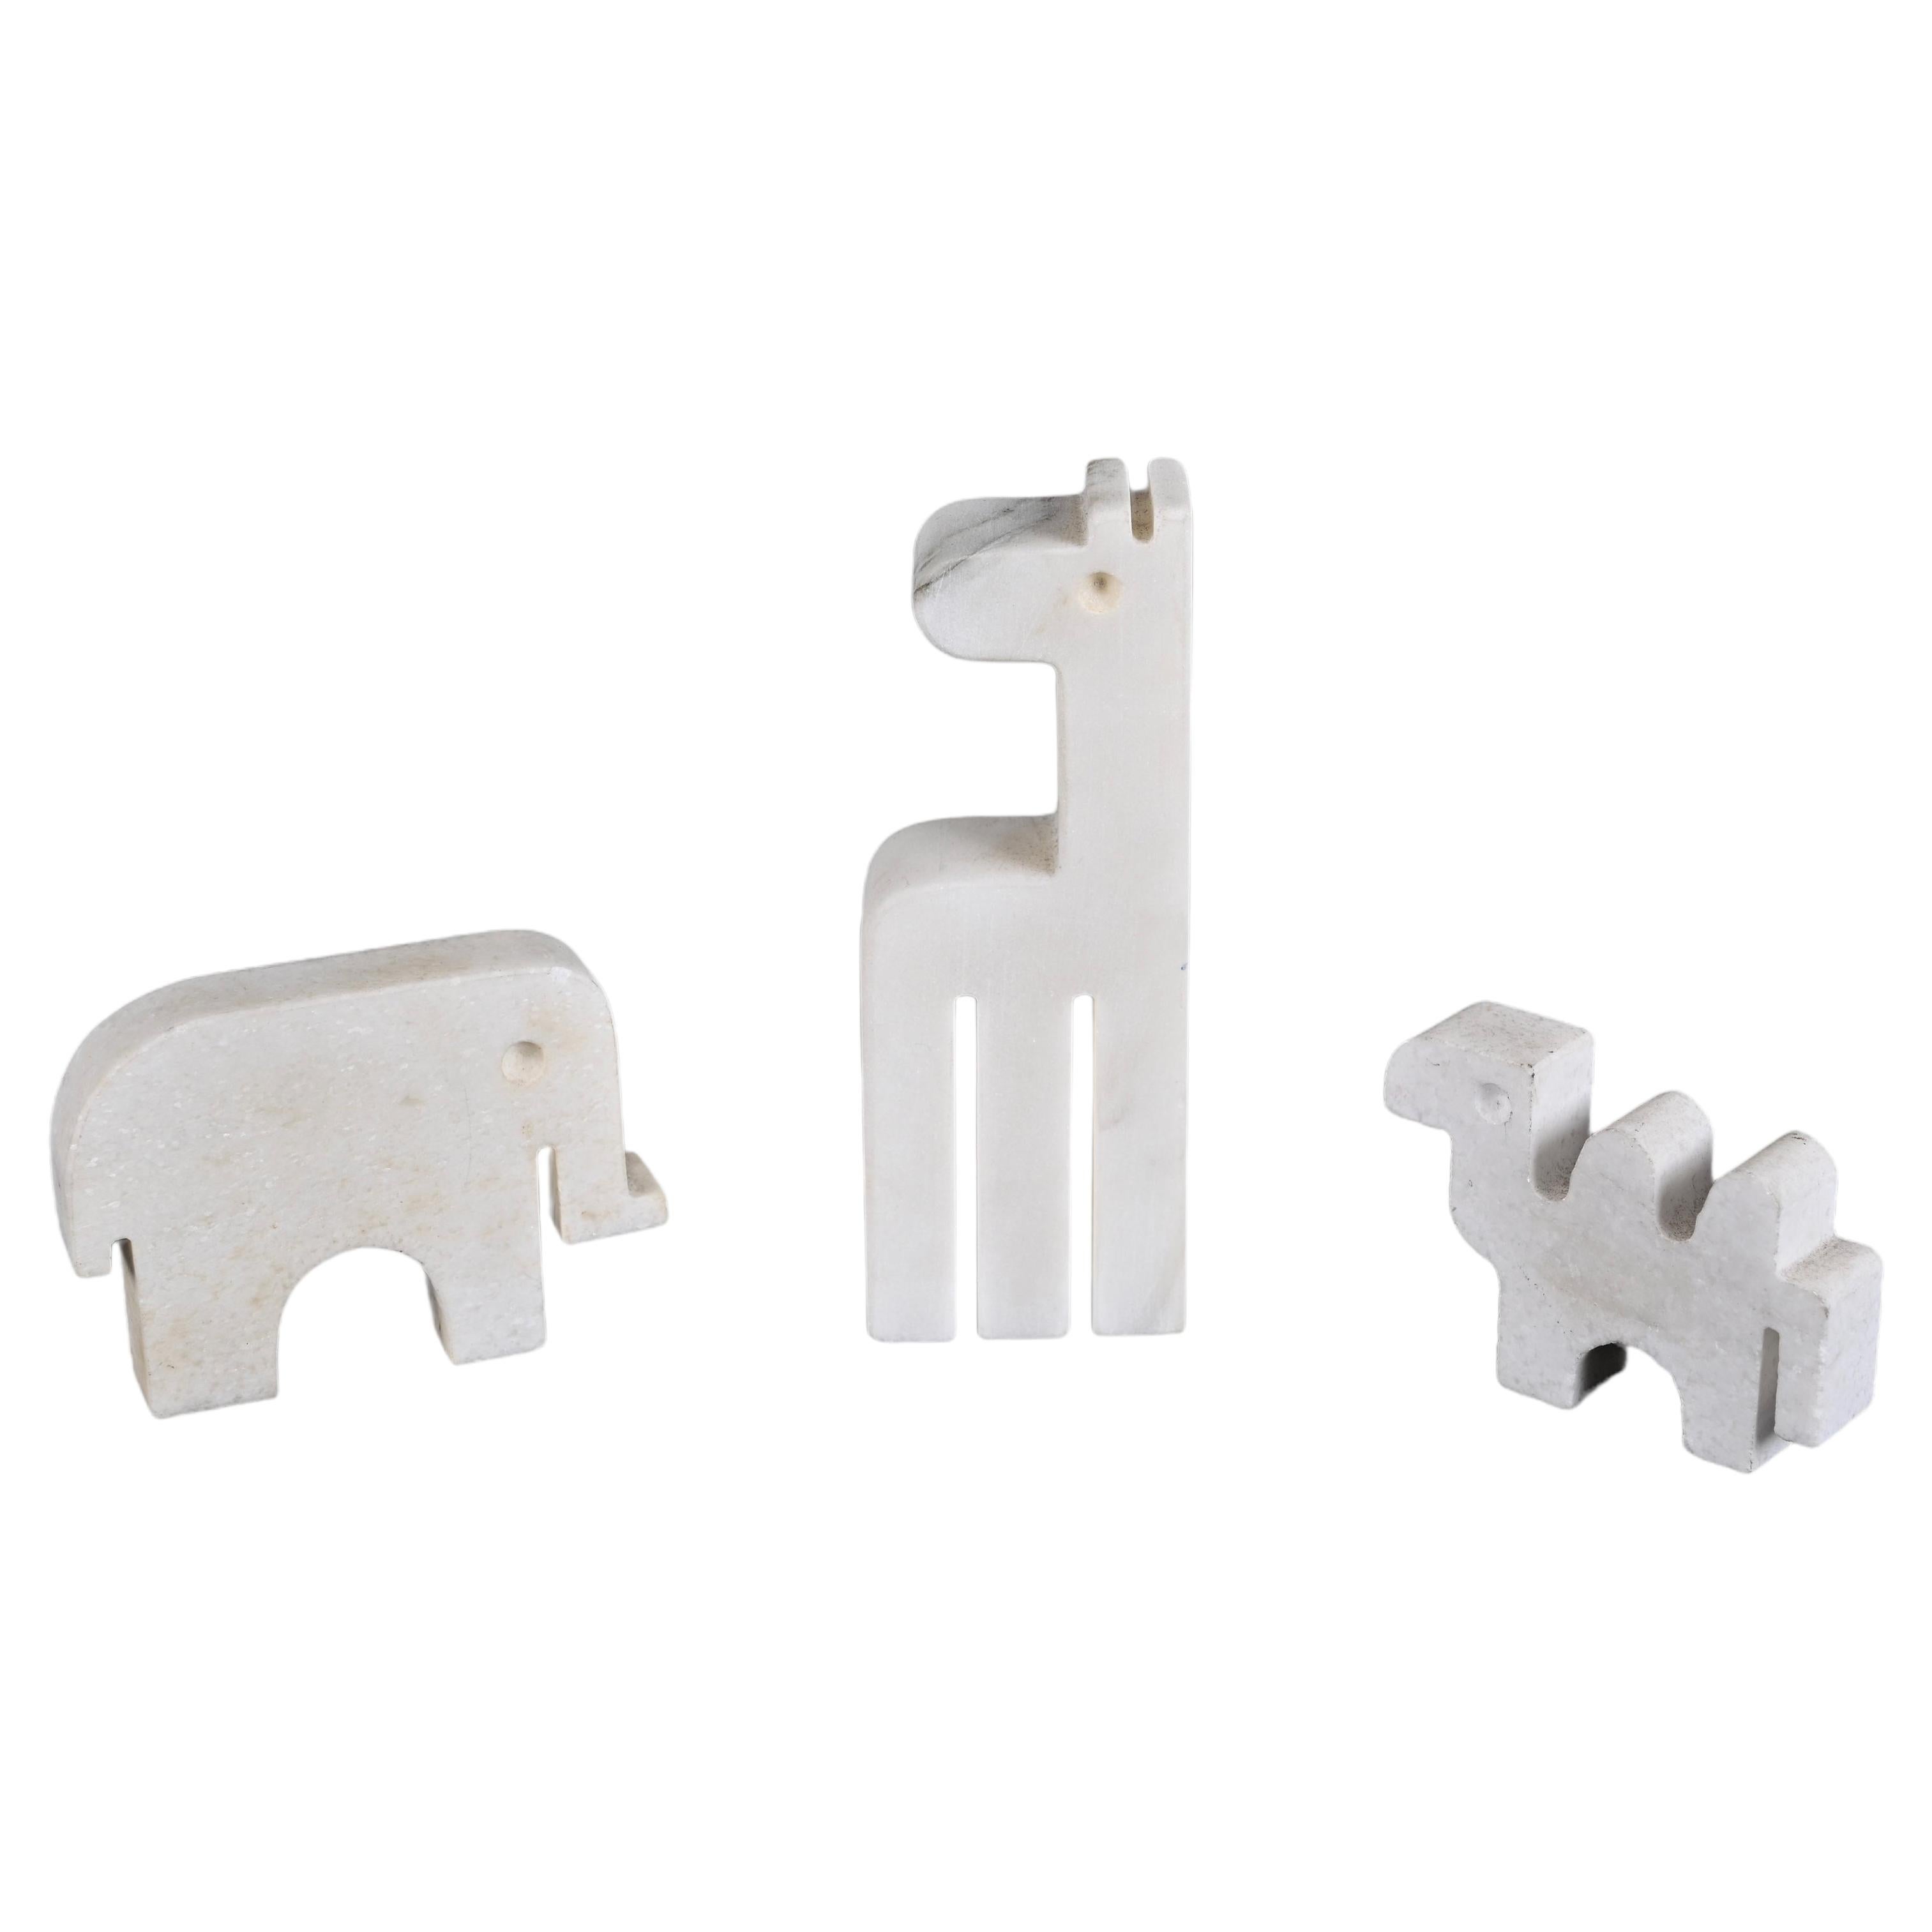 Set of Fratelli Mannelli Italian White Carrara Marble Animals Sculptures, 1970s For Sale